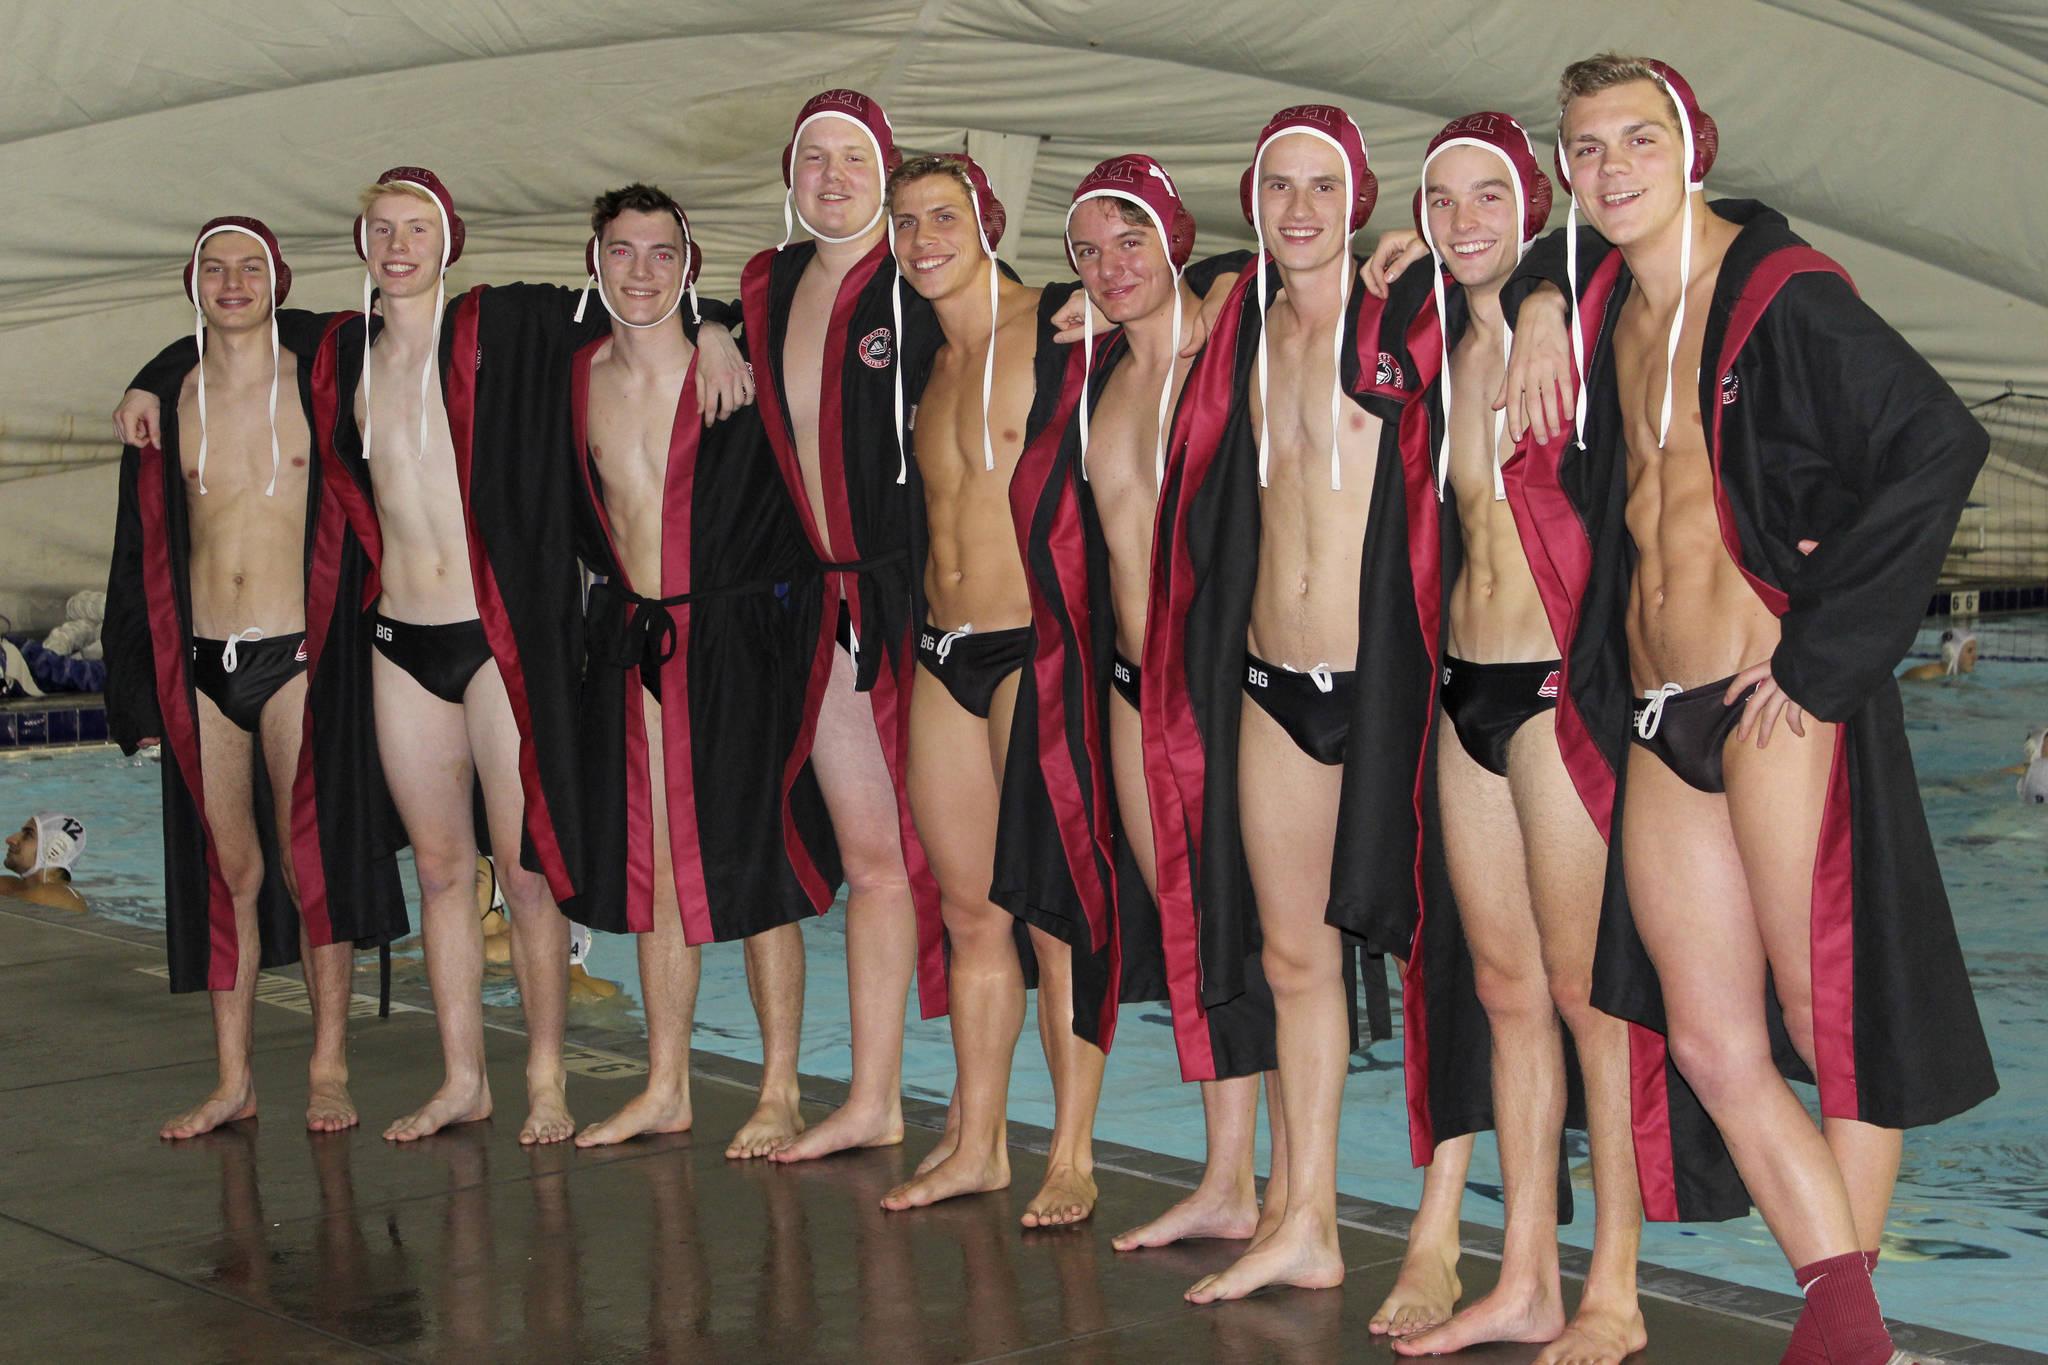 The Mercer Island Islanders boys water polo team earned a 19-1 win against Kennedy on senior night on Nov. 1. Mercer Island seniors pictured include Jacob Goldfarb, Tyler Robinson, Peter Davis, Cole Brittain, Will Cero, William Lacrampe, Leif Gullstad, Julian Rizza and Nate Robinson. Photo courtesy of Dawn Friedland